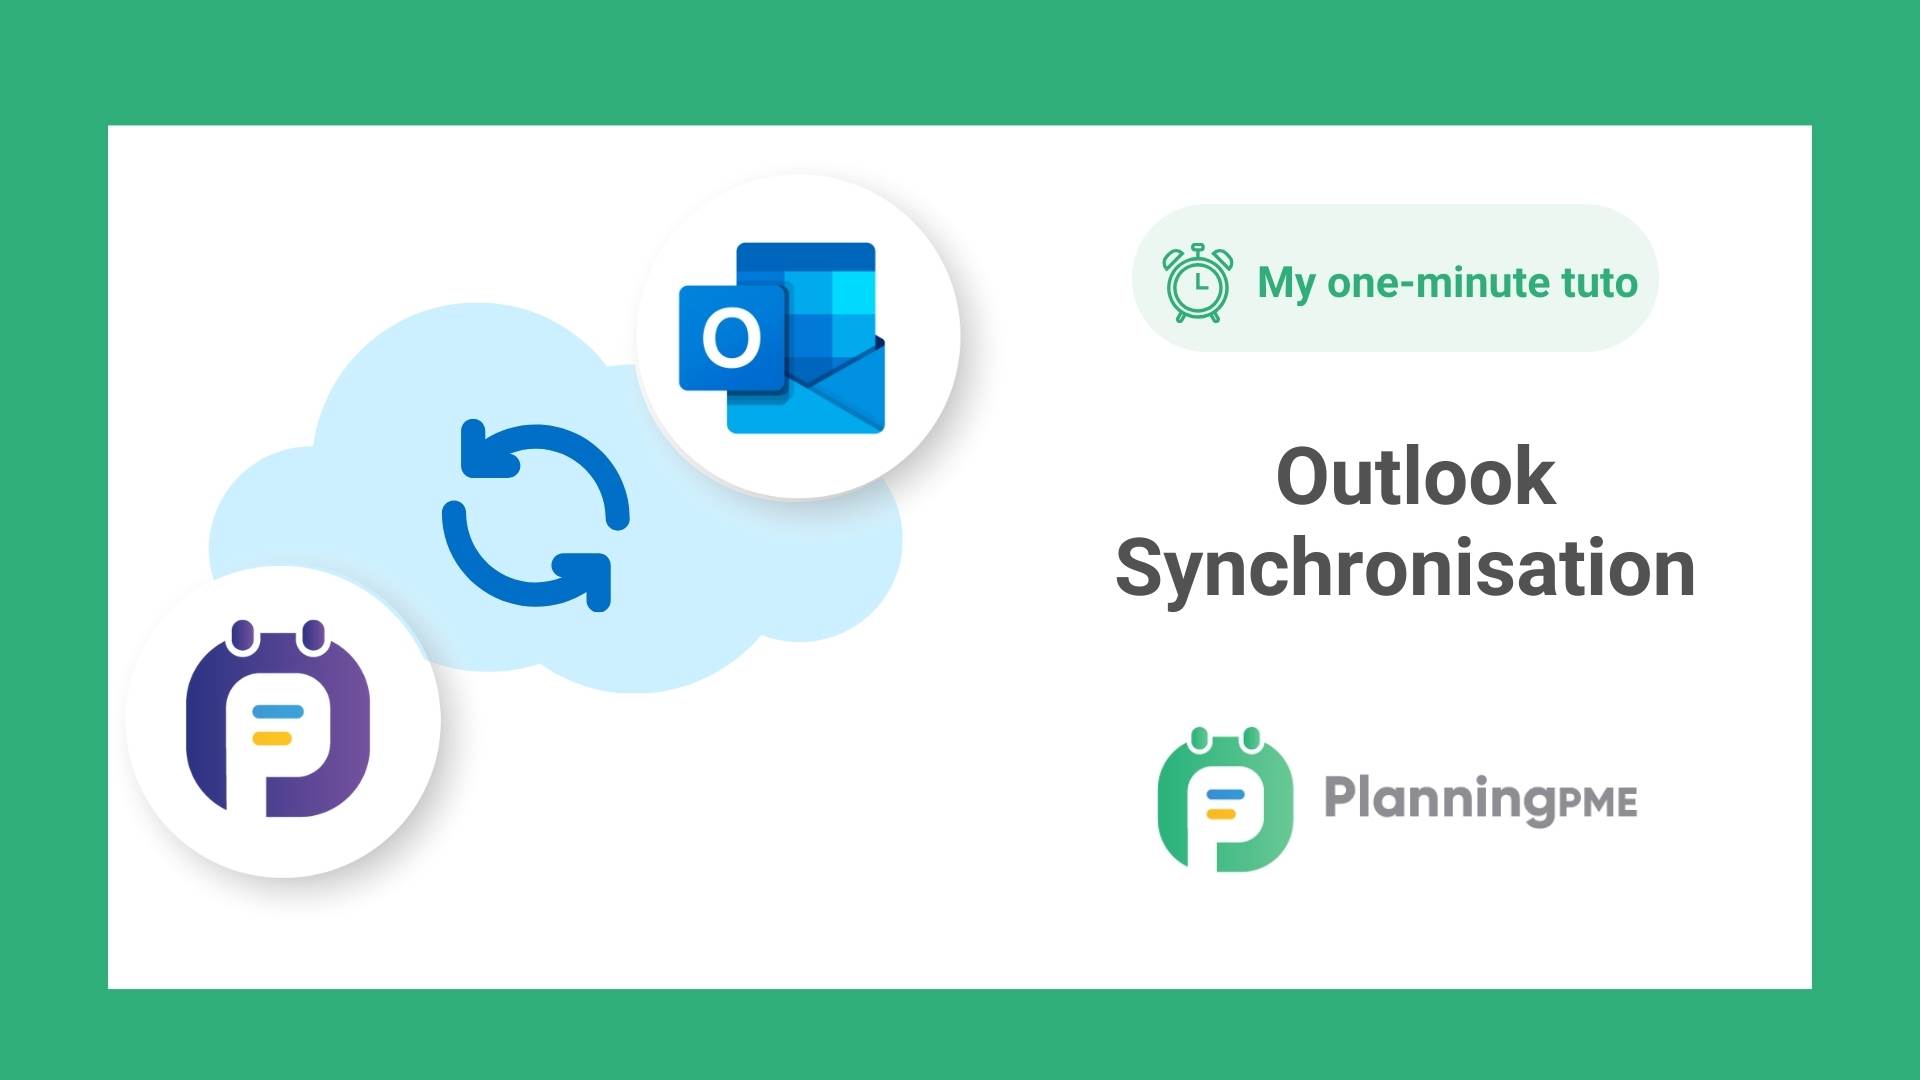 How to synchronize PlanningPME with your Outlook or Google Calendar?